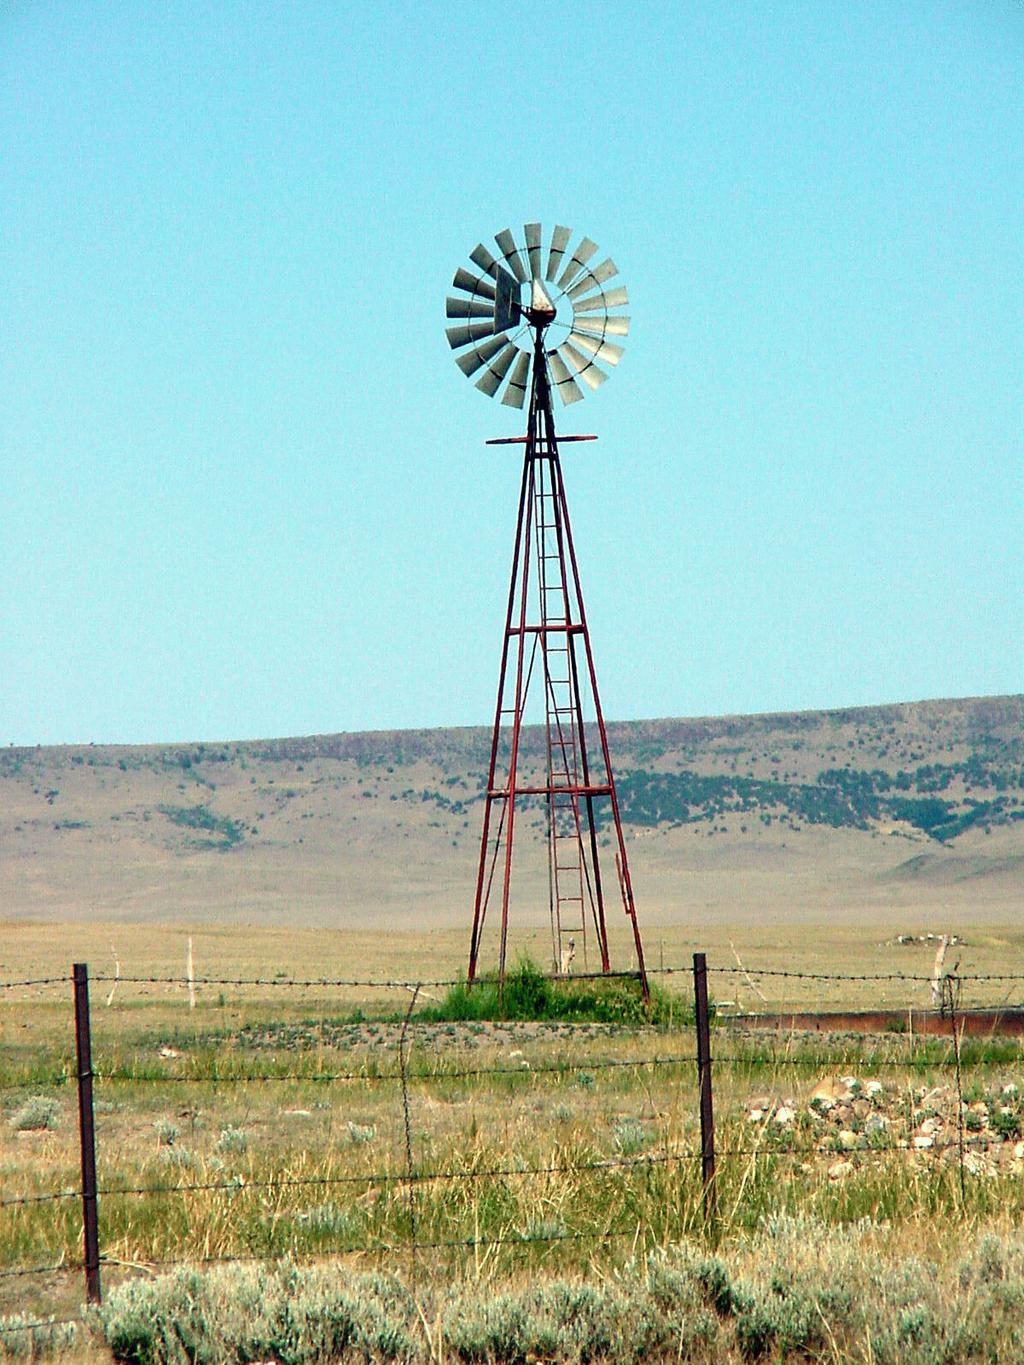 Windmill currently in use in the prairies to pump water